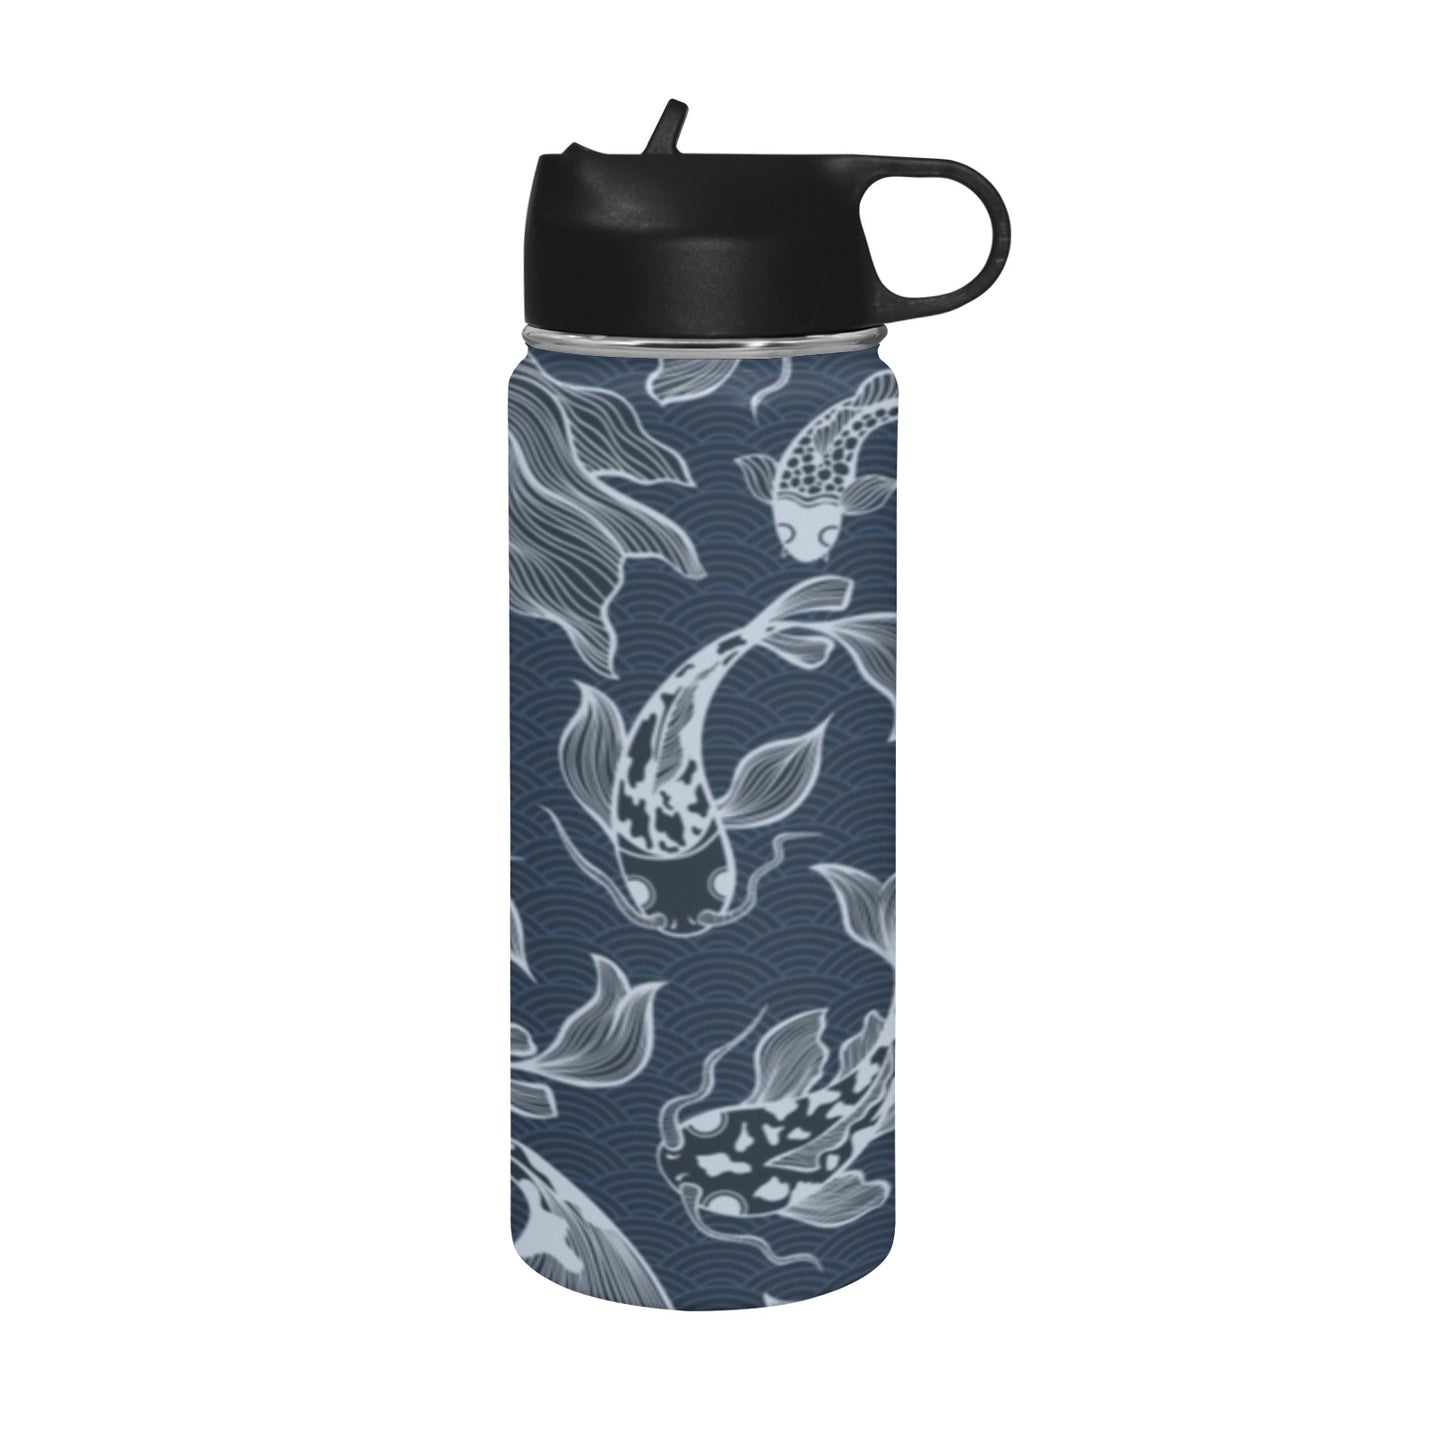 Blue Fish Insulated Water Bottle with Straw Lid (18 oz) Insulated Water Bottle with Straw Lid